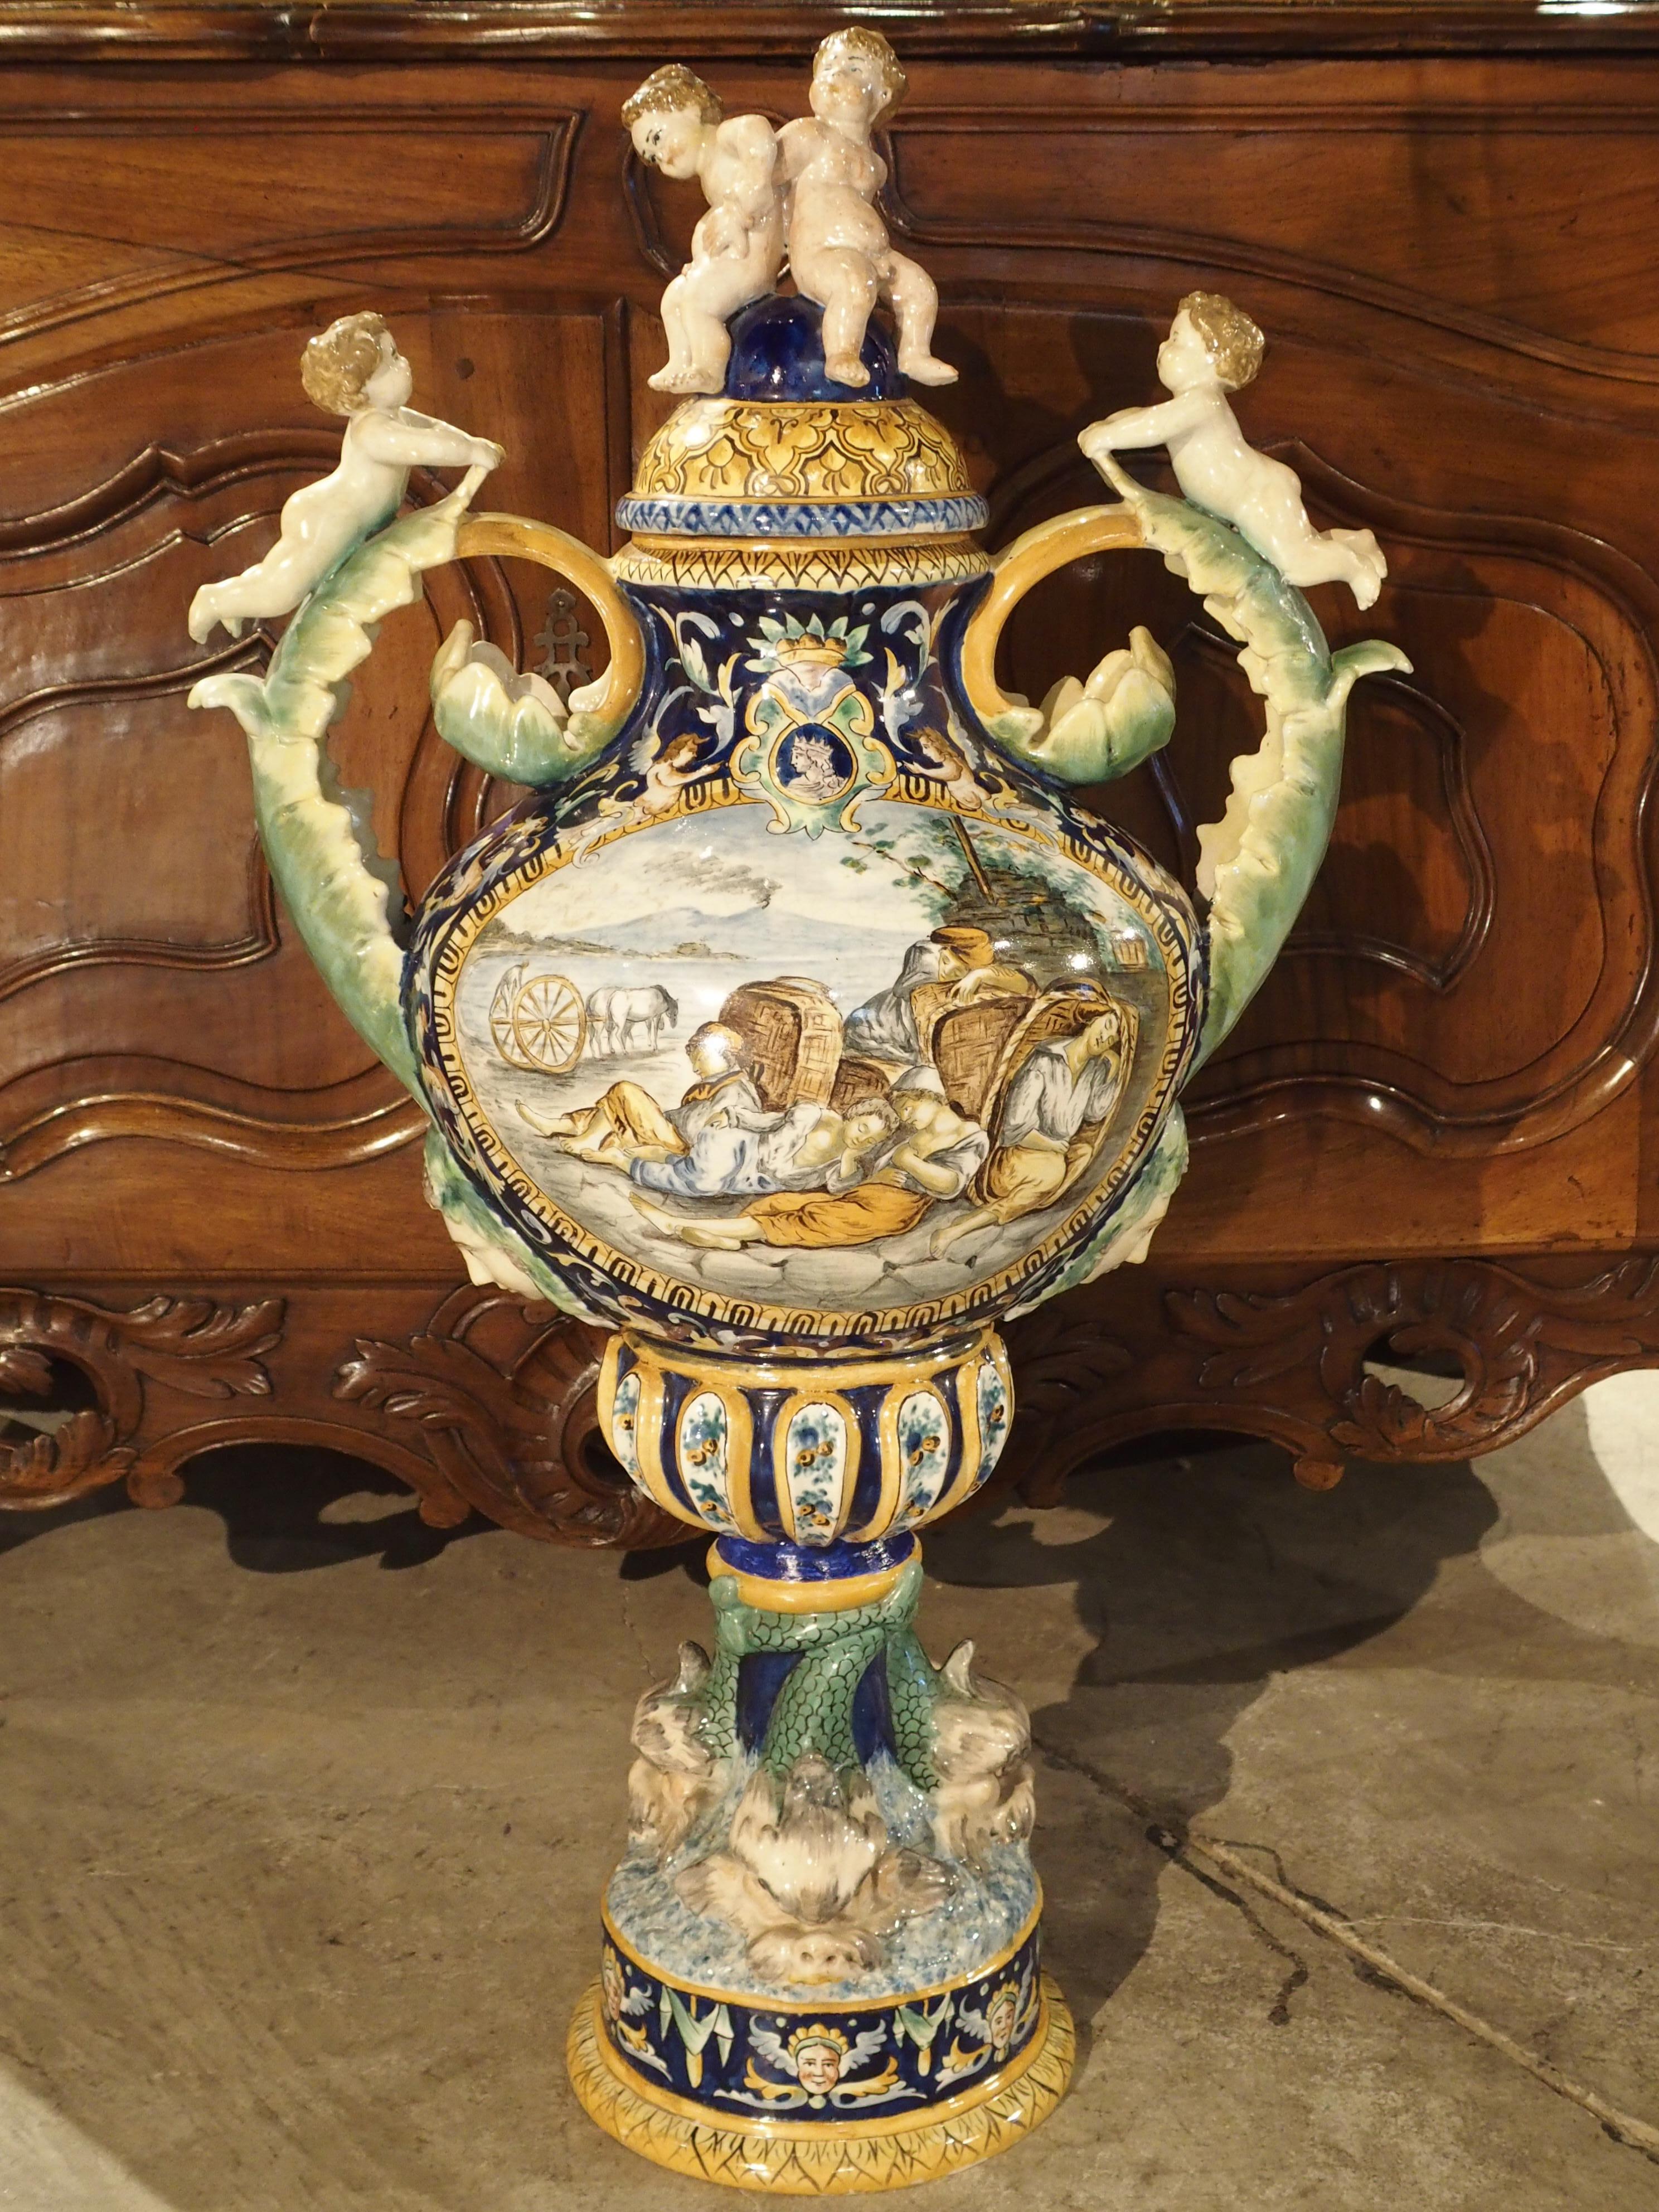 From Italy, this large, hand-painted Majolica urn dates to the late 1800s. At the top are two putti seated upon the lid and two more putti lying upon their stomachs on the curled acanthus leaf handles. Two detailed scenes in cartouches have been